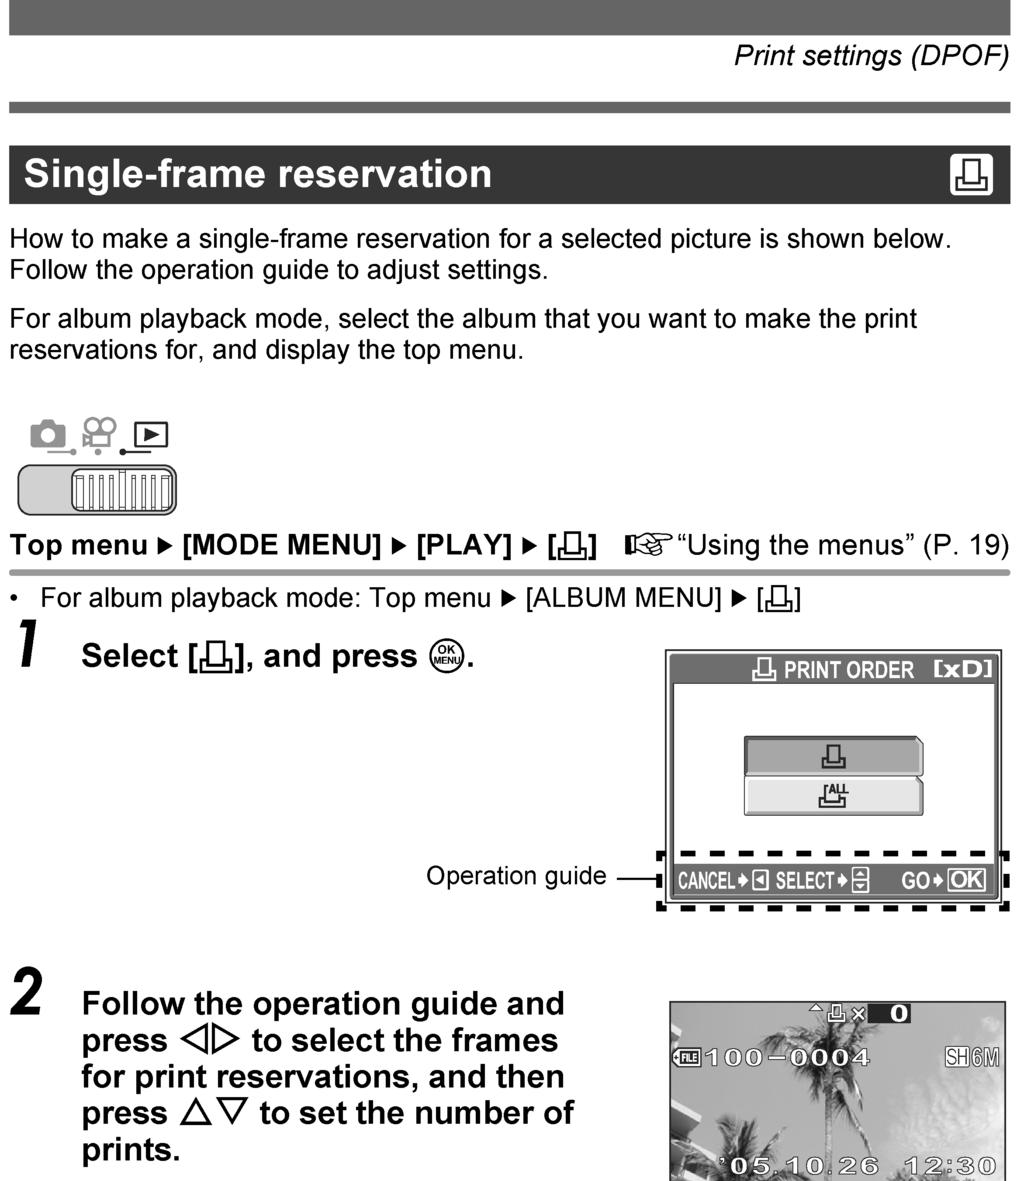 How to read the procedure pages 1 A sample of a procedure page is shown below explaining the notation. Look at it carefully before taking or viewing pictures.